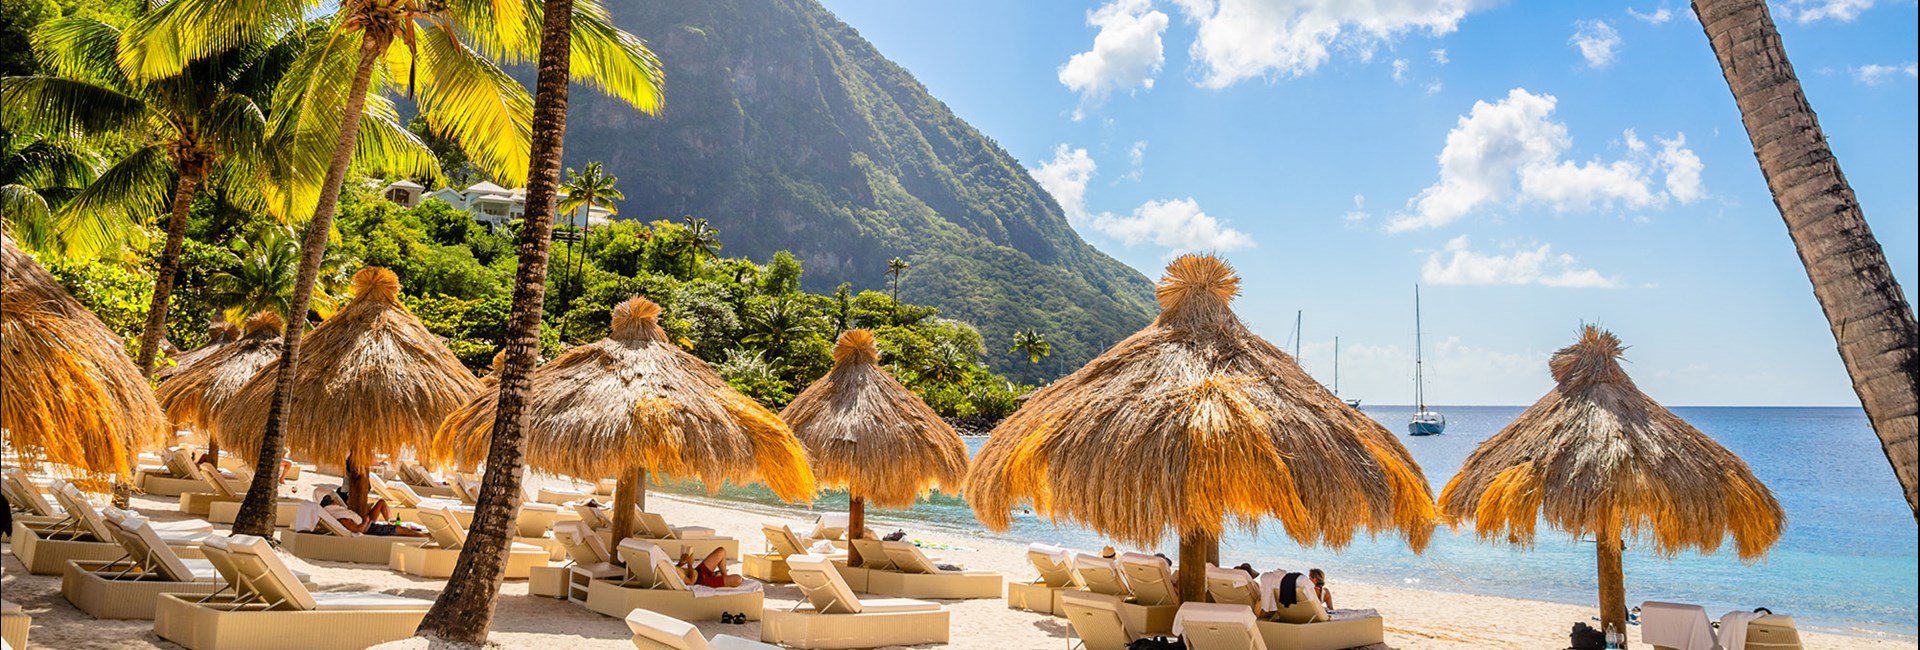 Caribbean beach with palms and straw umbrellas on the shore with Gros Piton mountain in background